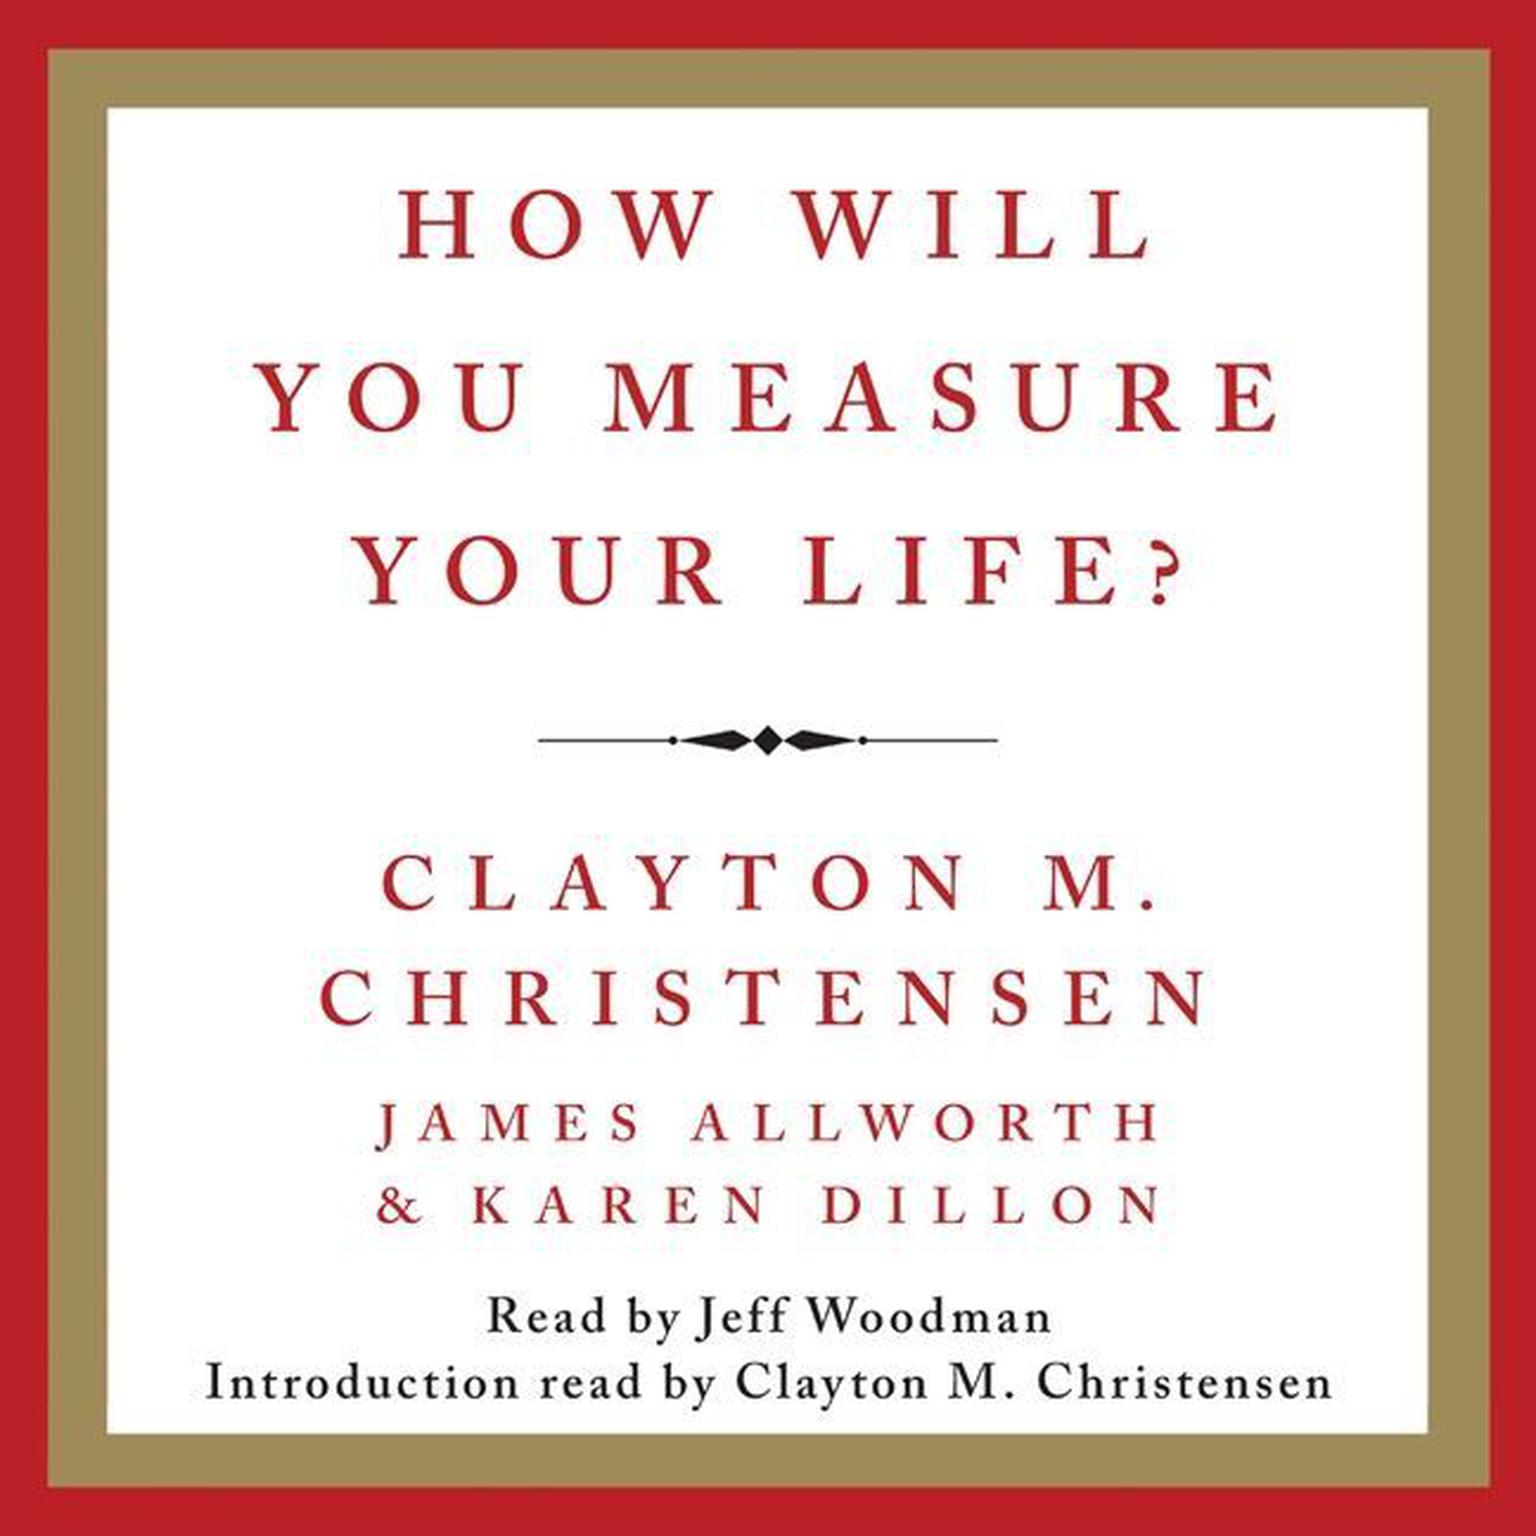 How Will You Measure Your Life? Audiobook, by Clayton M. Christensen